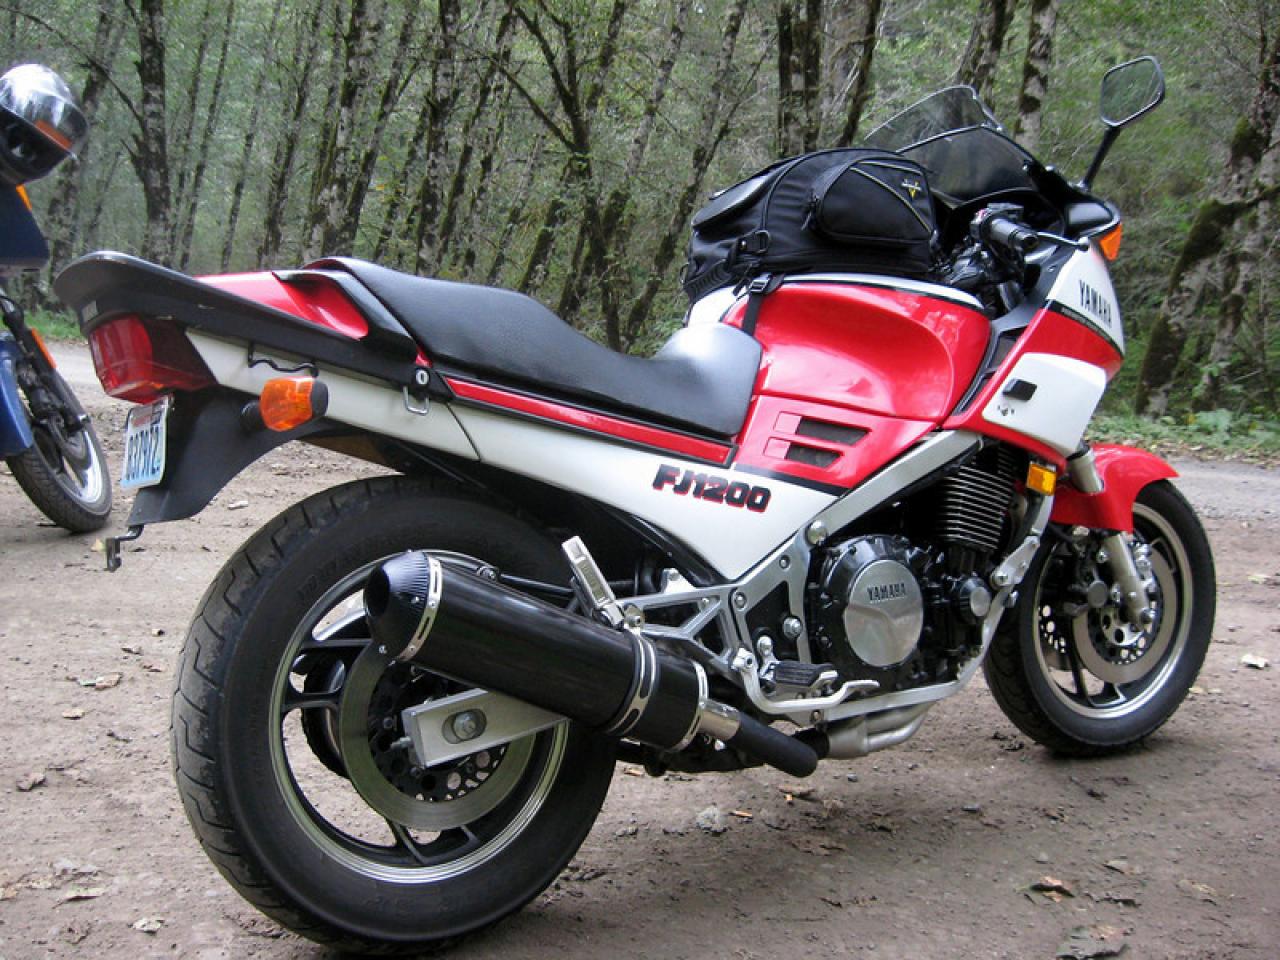 Review of Yamaha FJ 1100 1985: pictures, live photos 